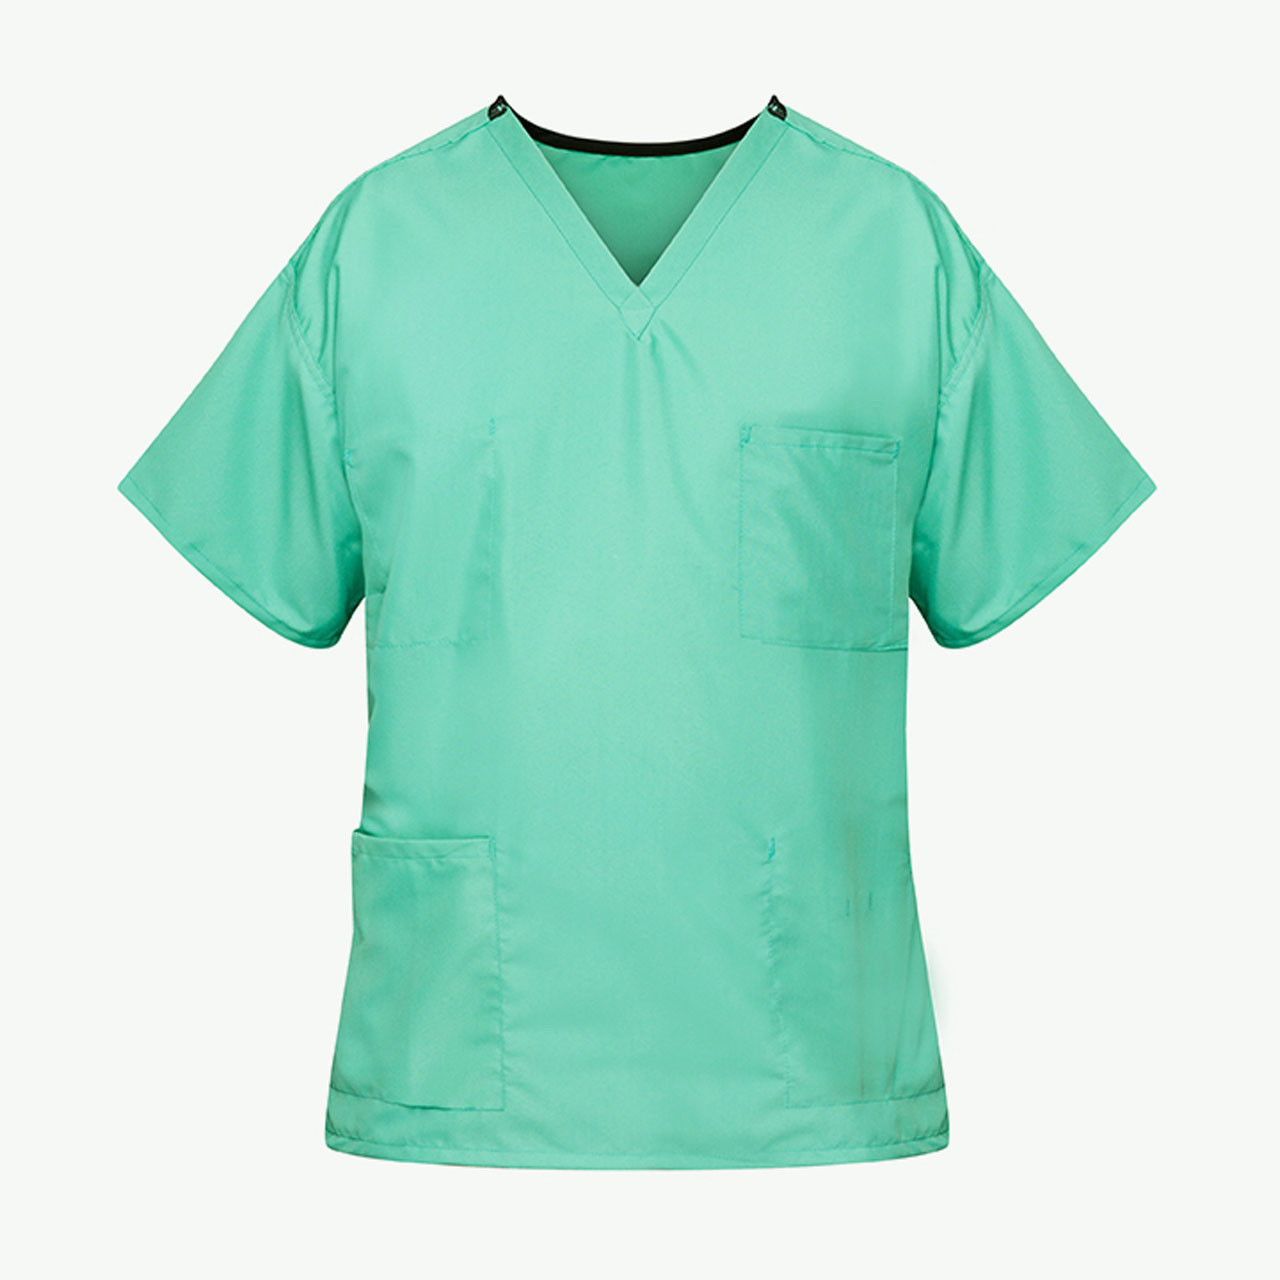 What is the advantage of the reversible jade green scrubs?